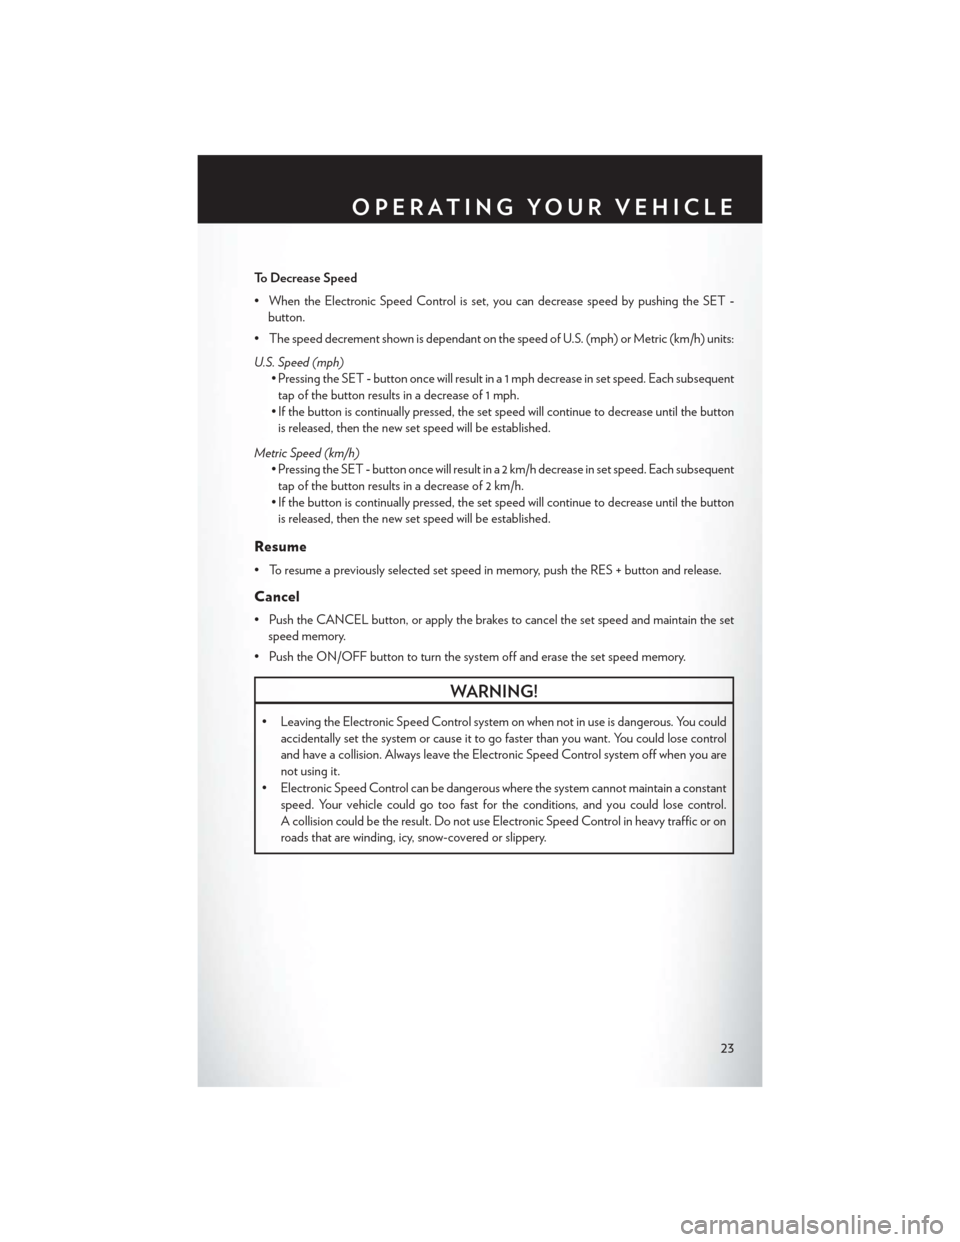 CHRYSLER 200 2014 1.G User Guide To Decrease Speed
• When the Electronic Speed Control is set, you can decrease speed by pushing the SET-
button.
• The speed decrement shown is dependant on the speed of U.S. (mph) or Metric (km/h